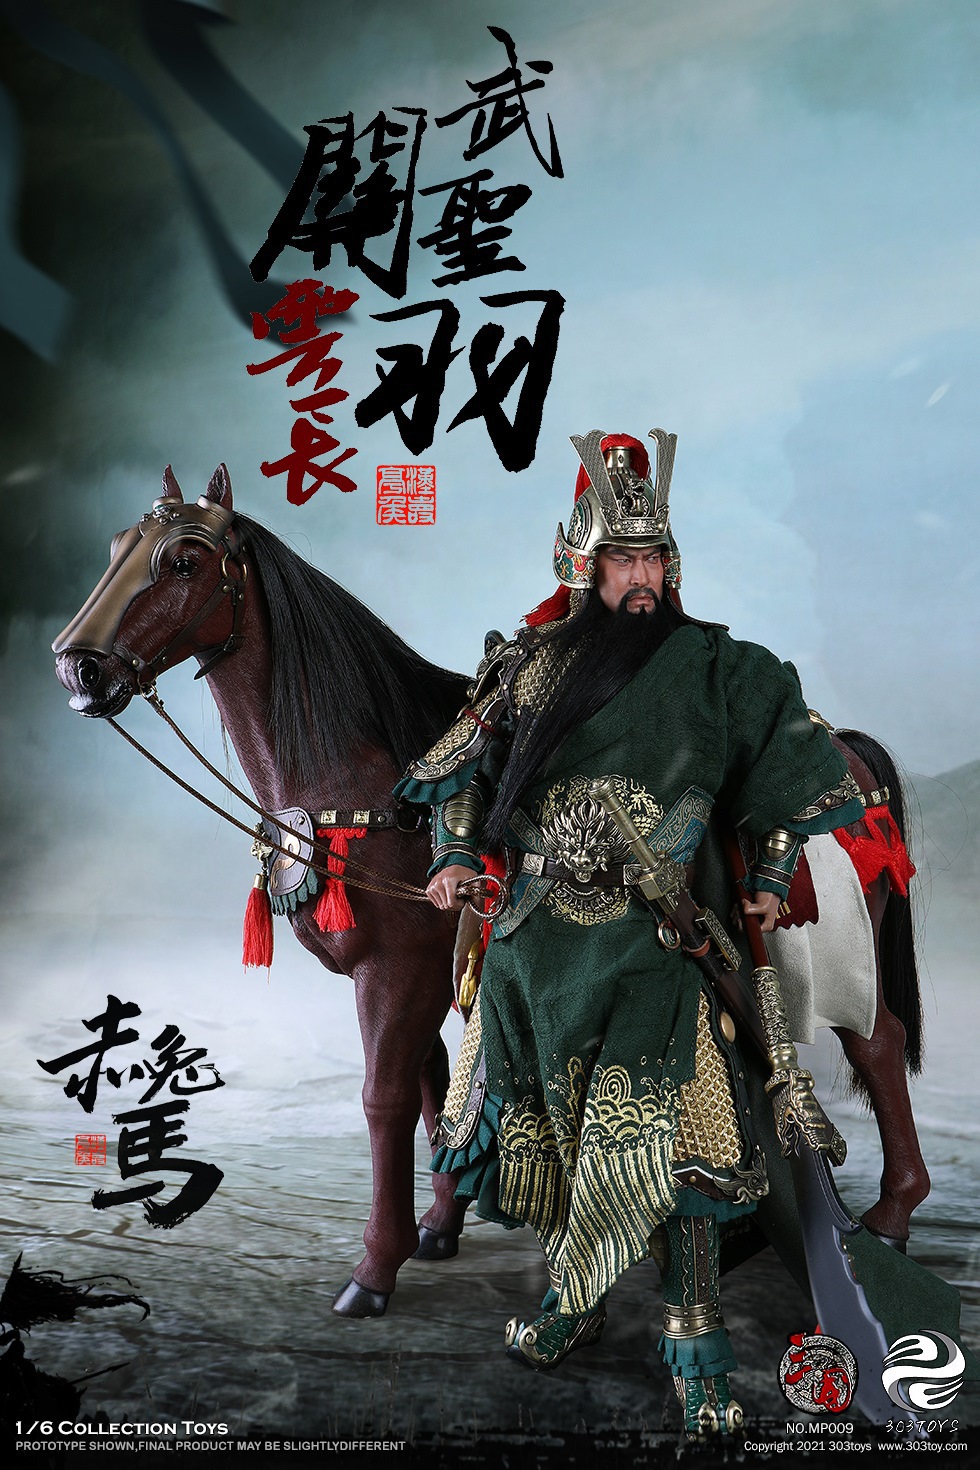 NEW PRODUCT: 303TOYS: 1/6 THREE KINGDOMS SERIES - MARQUIS GUAN YU YUNCHANG, GOD OF WAR (Pure Copper Yellow Wu Edition / Yellow Dragon Edition) RED RABBIT Horse 22180011